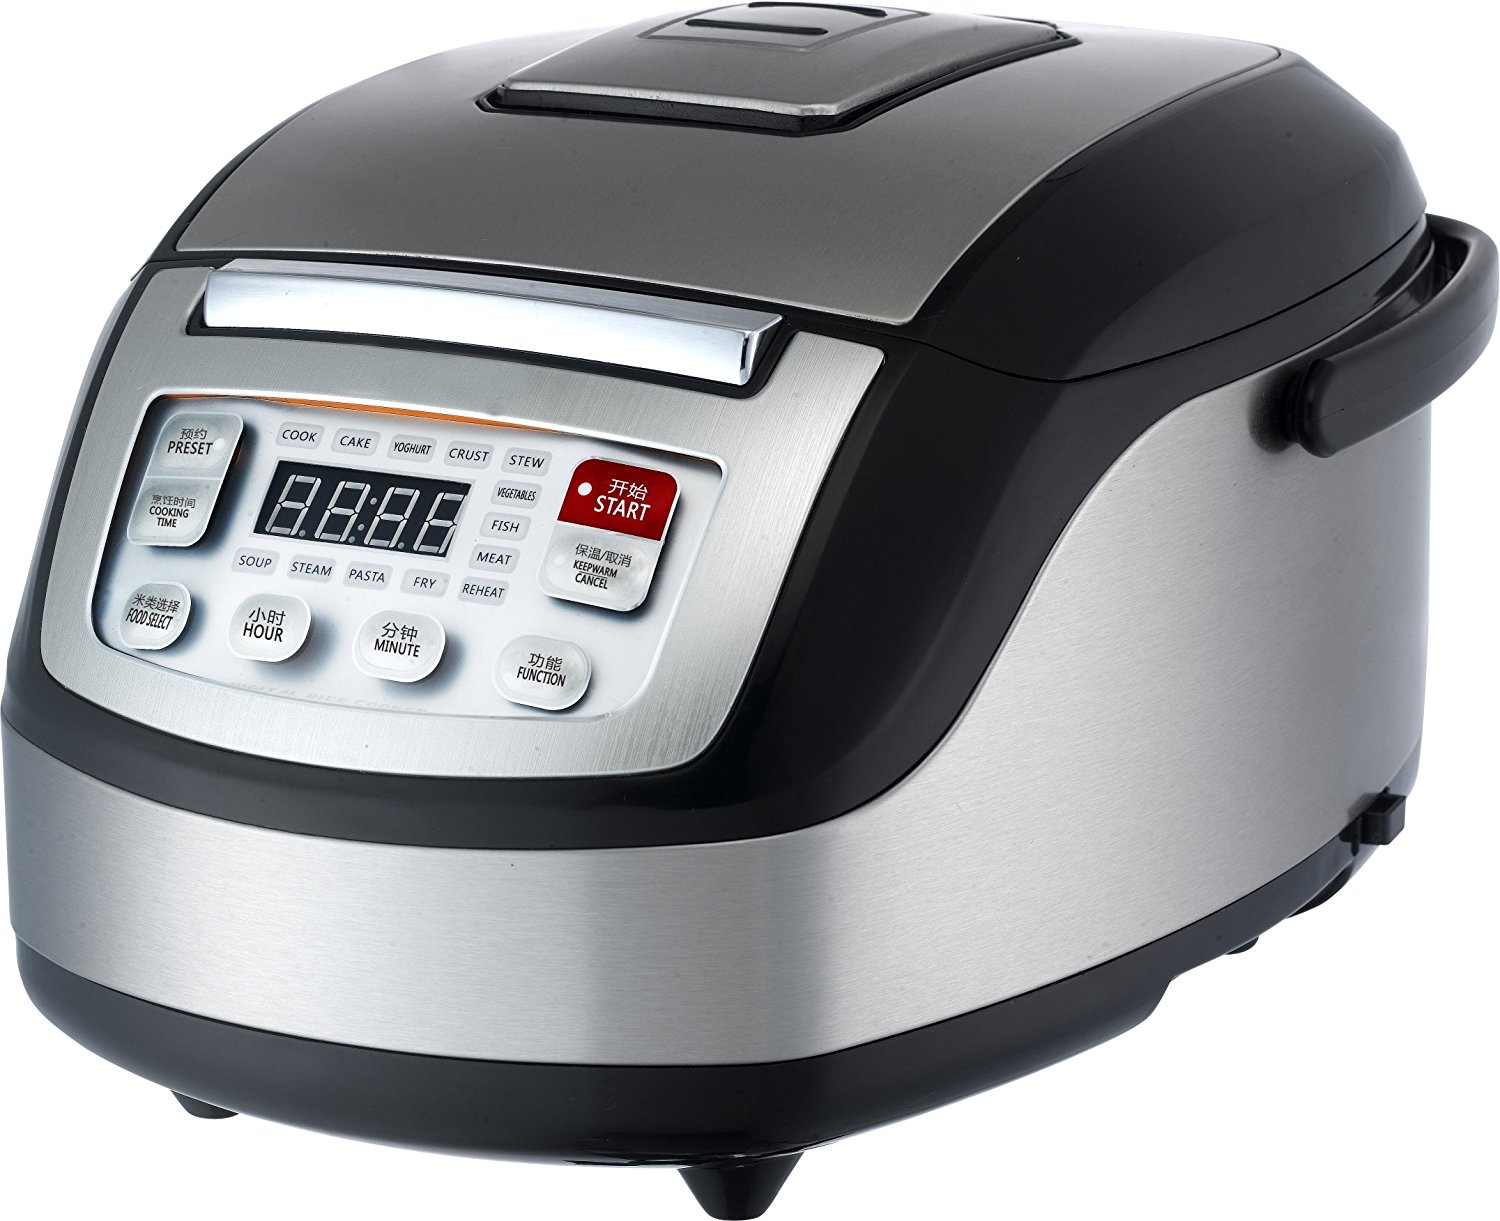 Best Fuzzy Logic Rice Cookers With Cake Function And Reviews